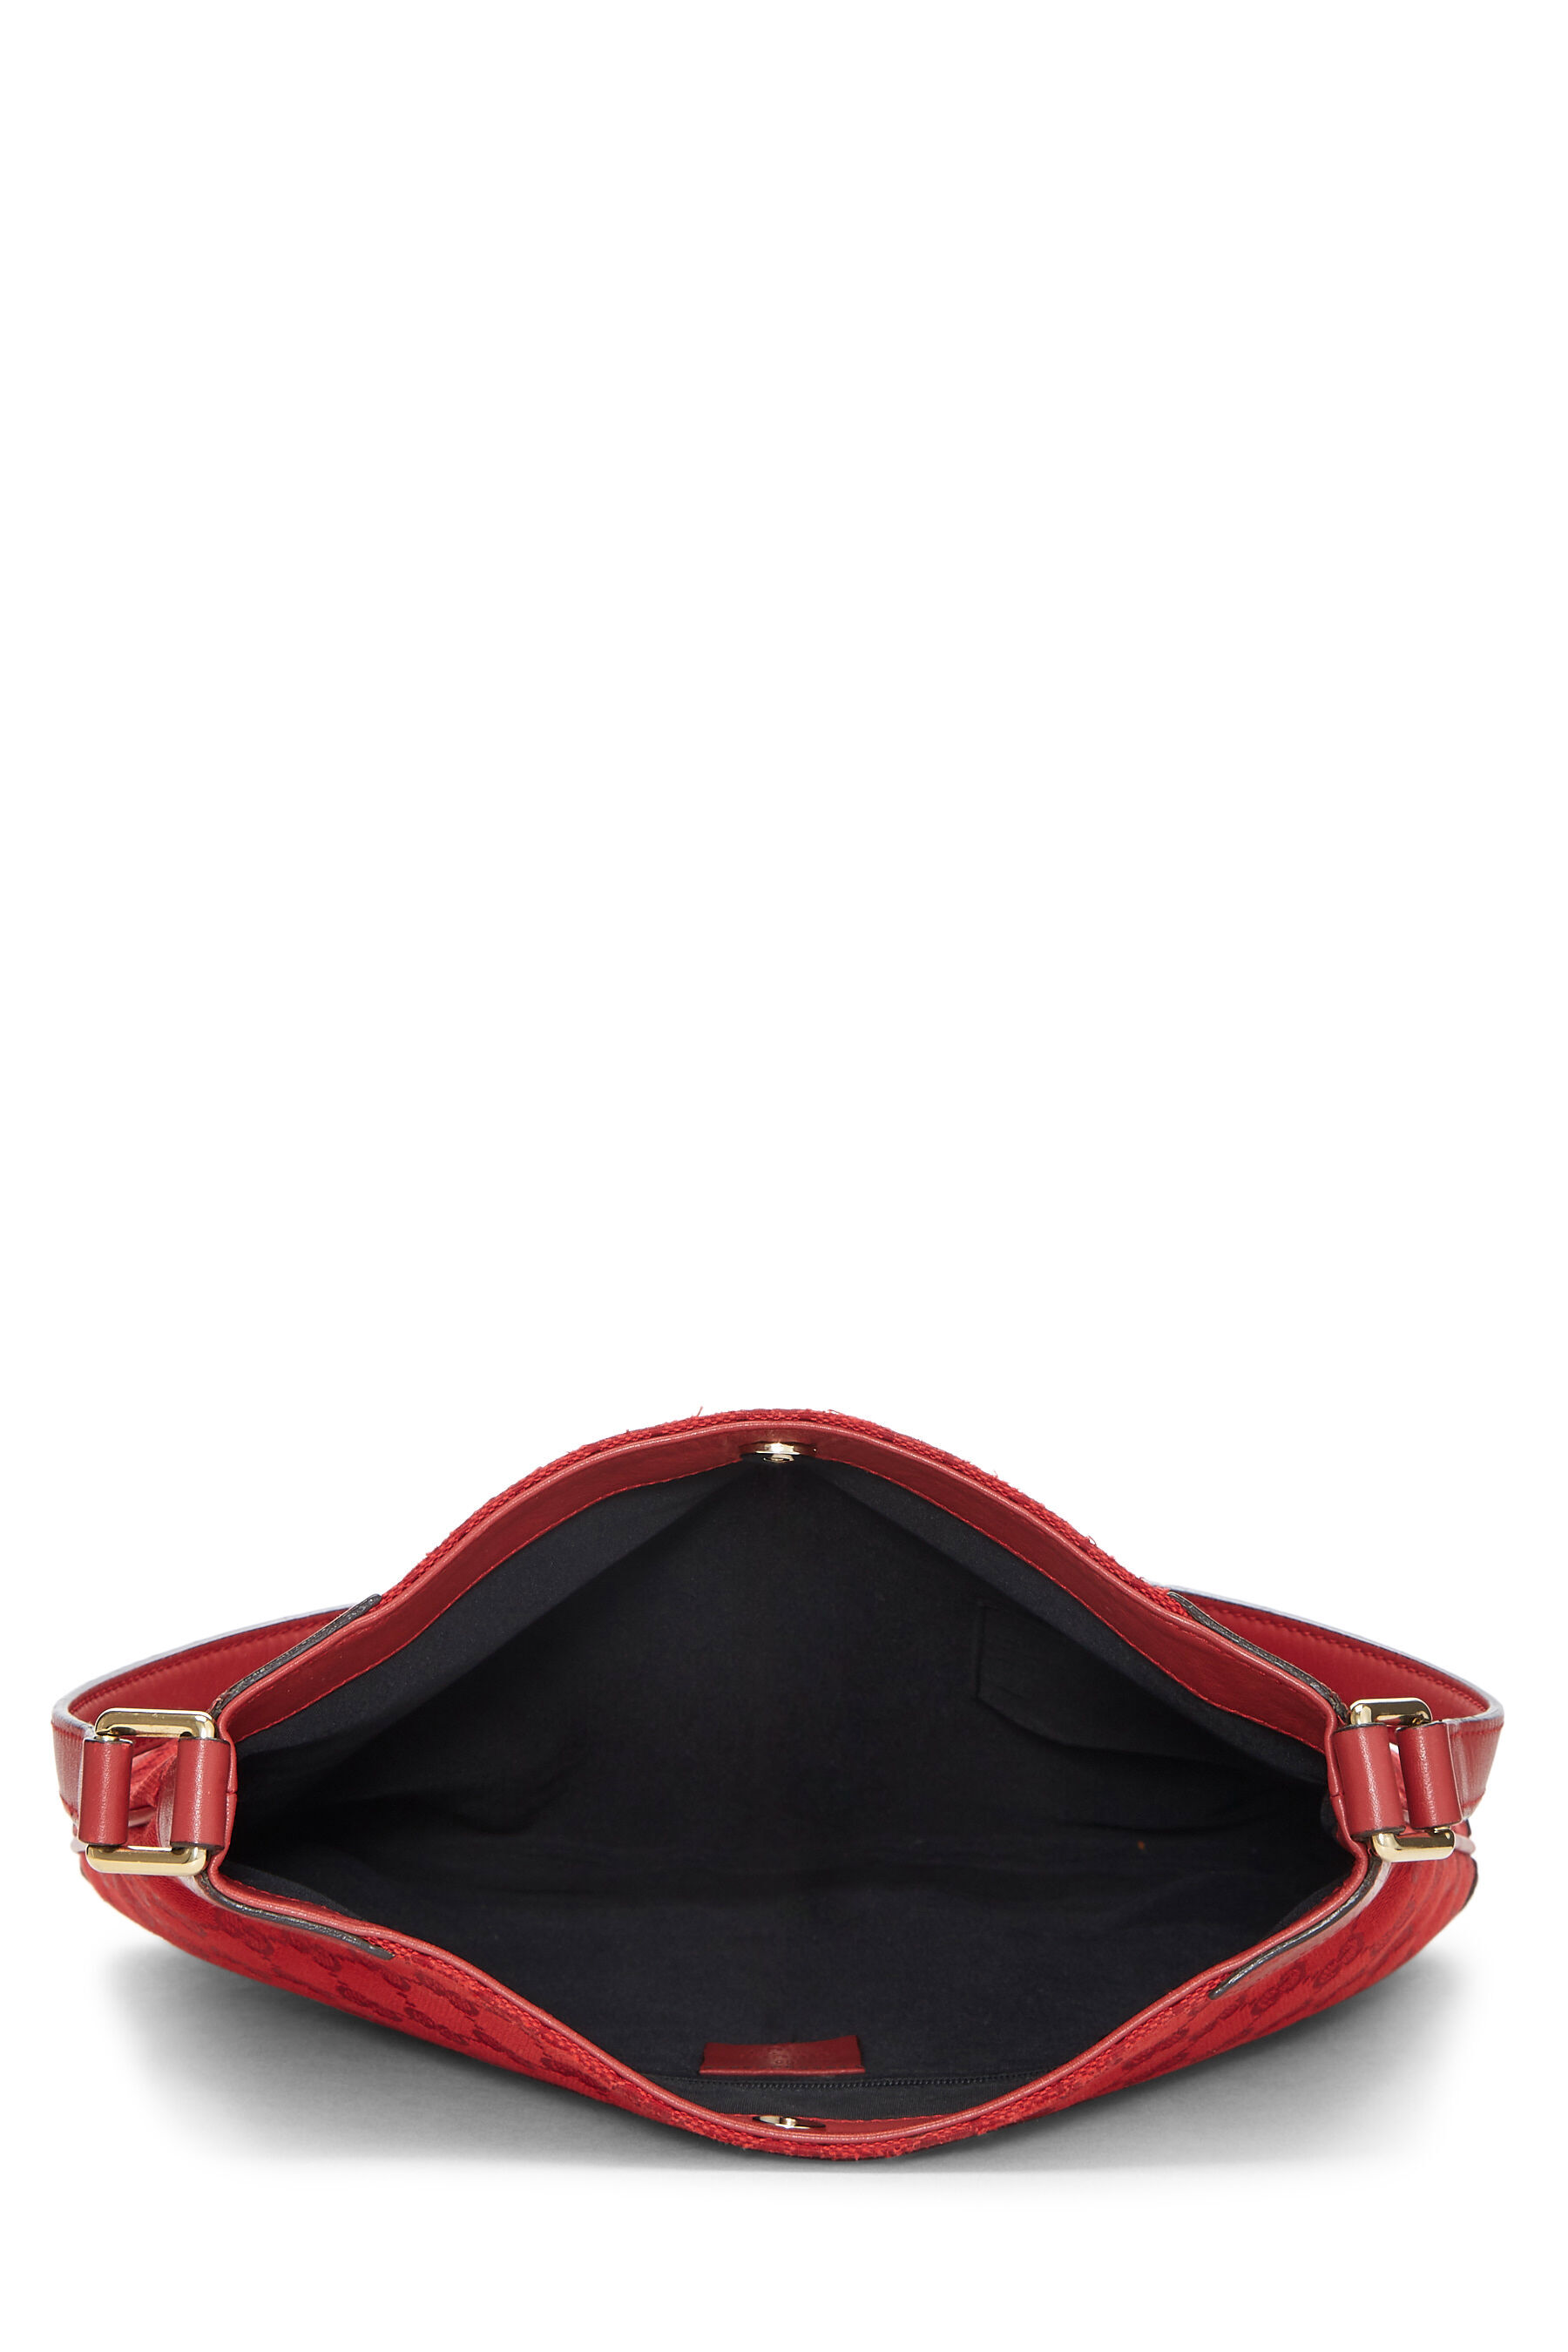 Gucci Arli Small Leather Shoulder Bag in Red